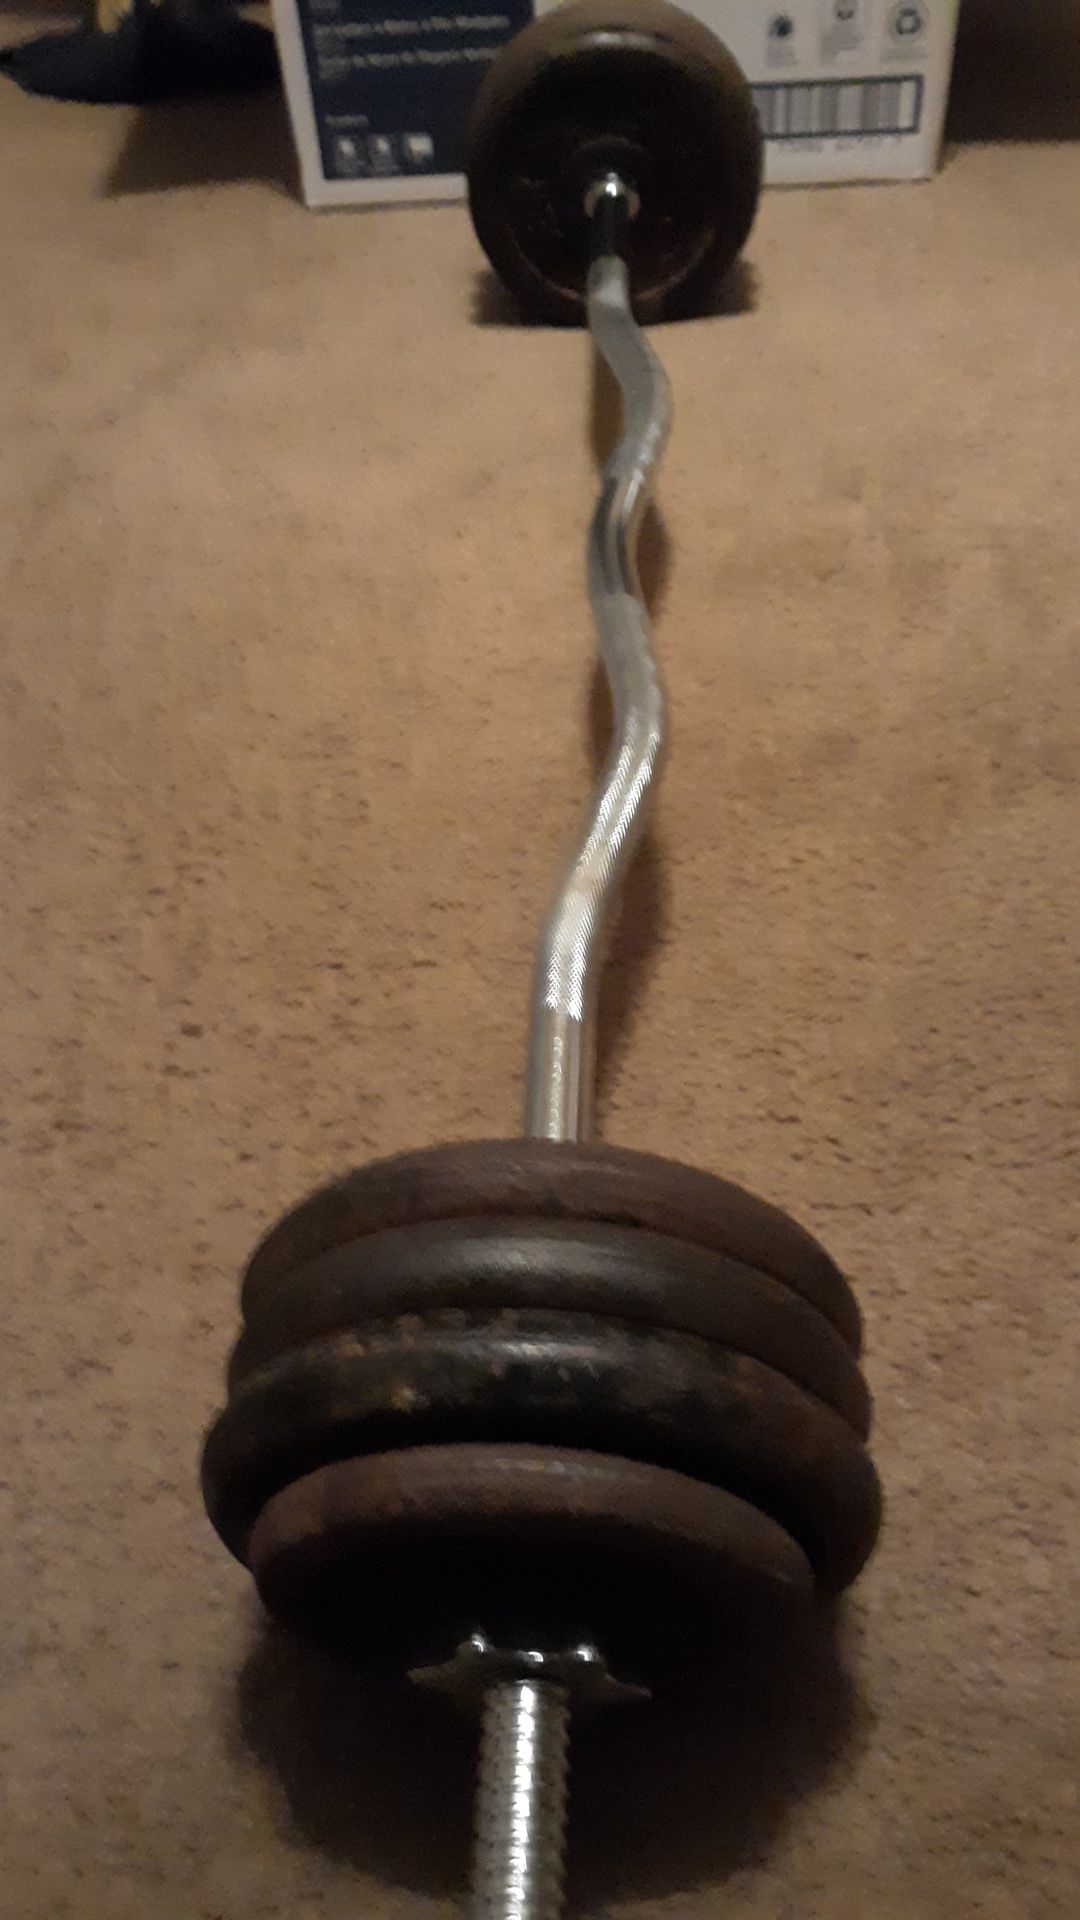 Curl bar and weights